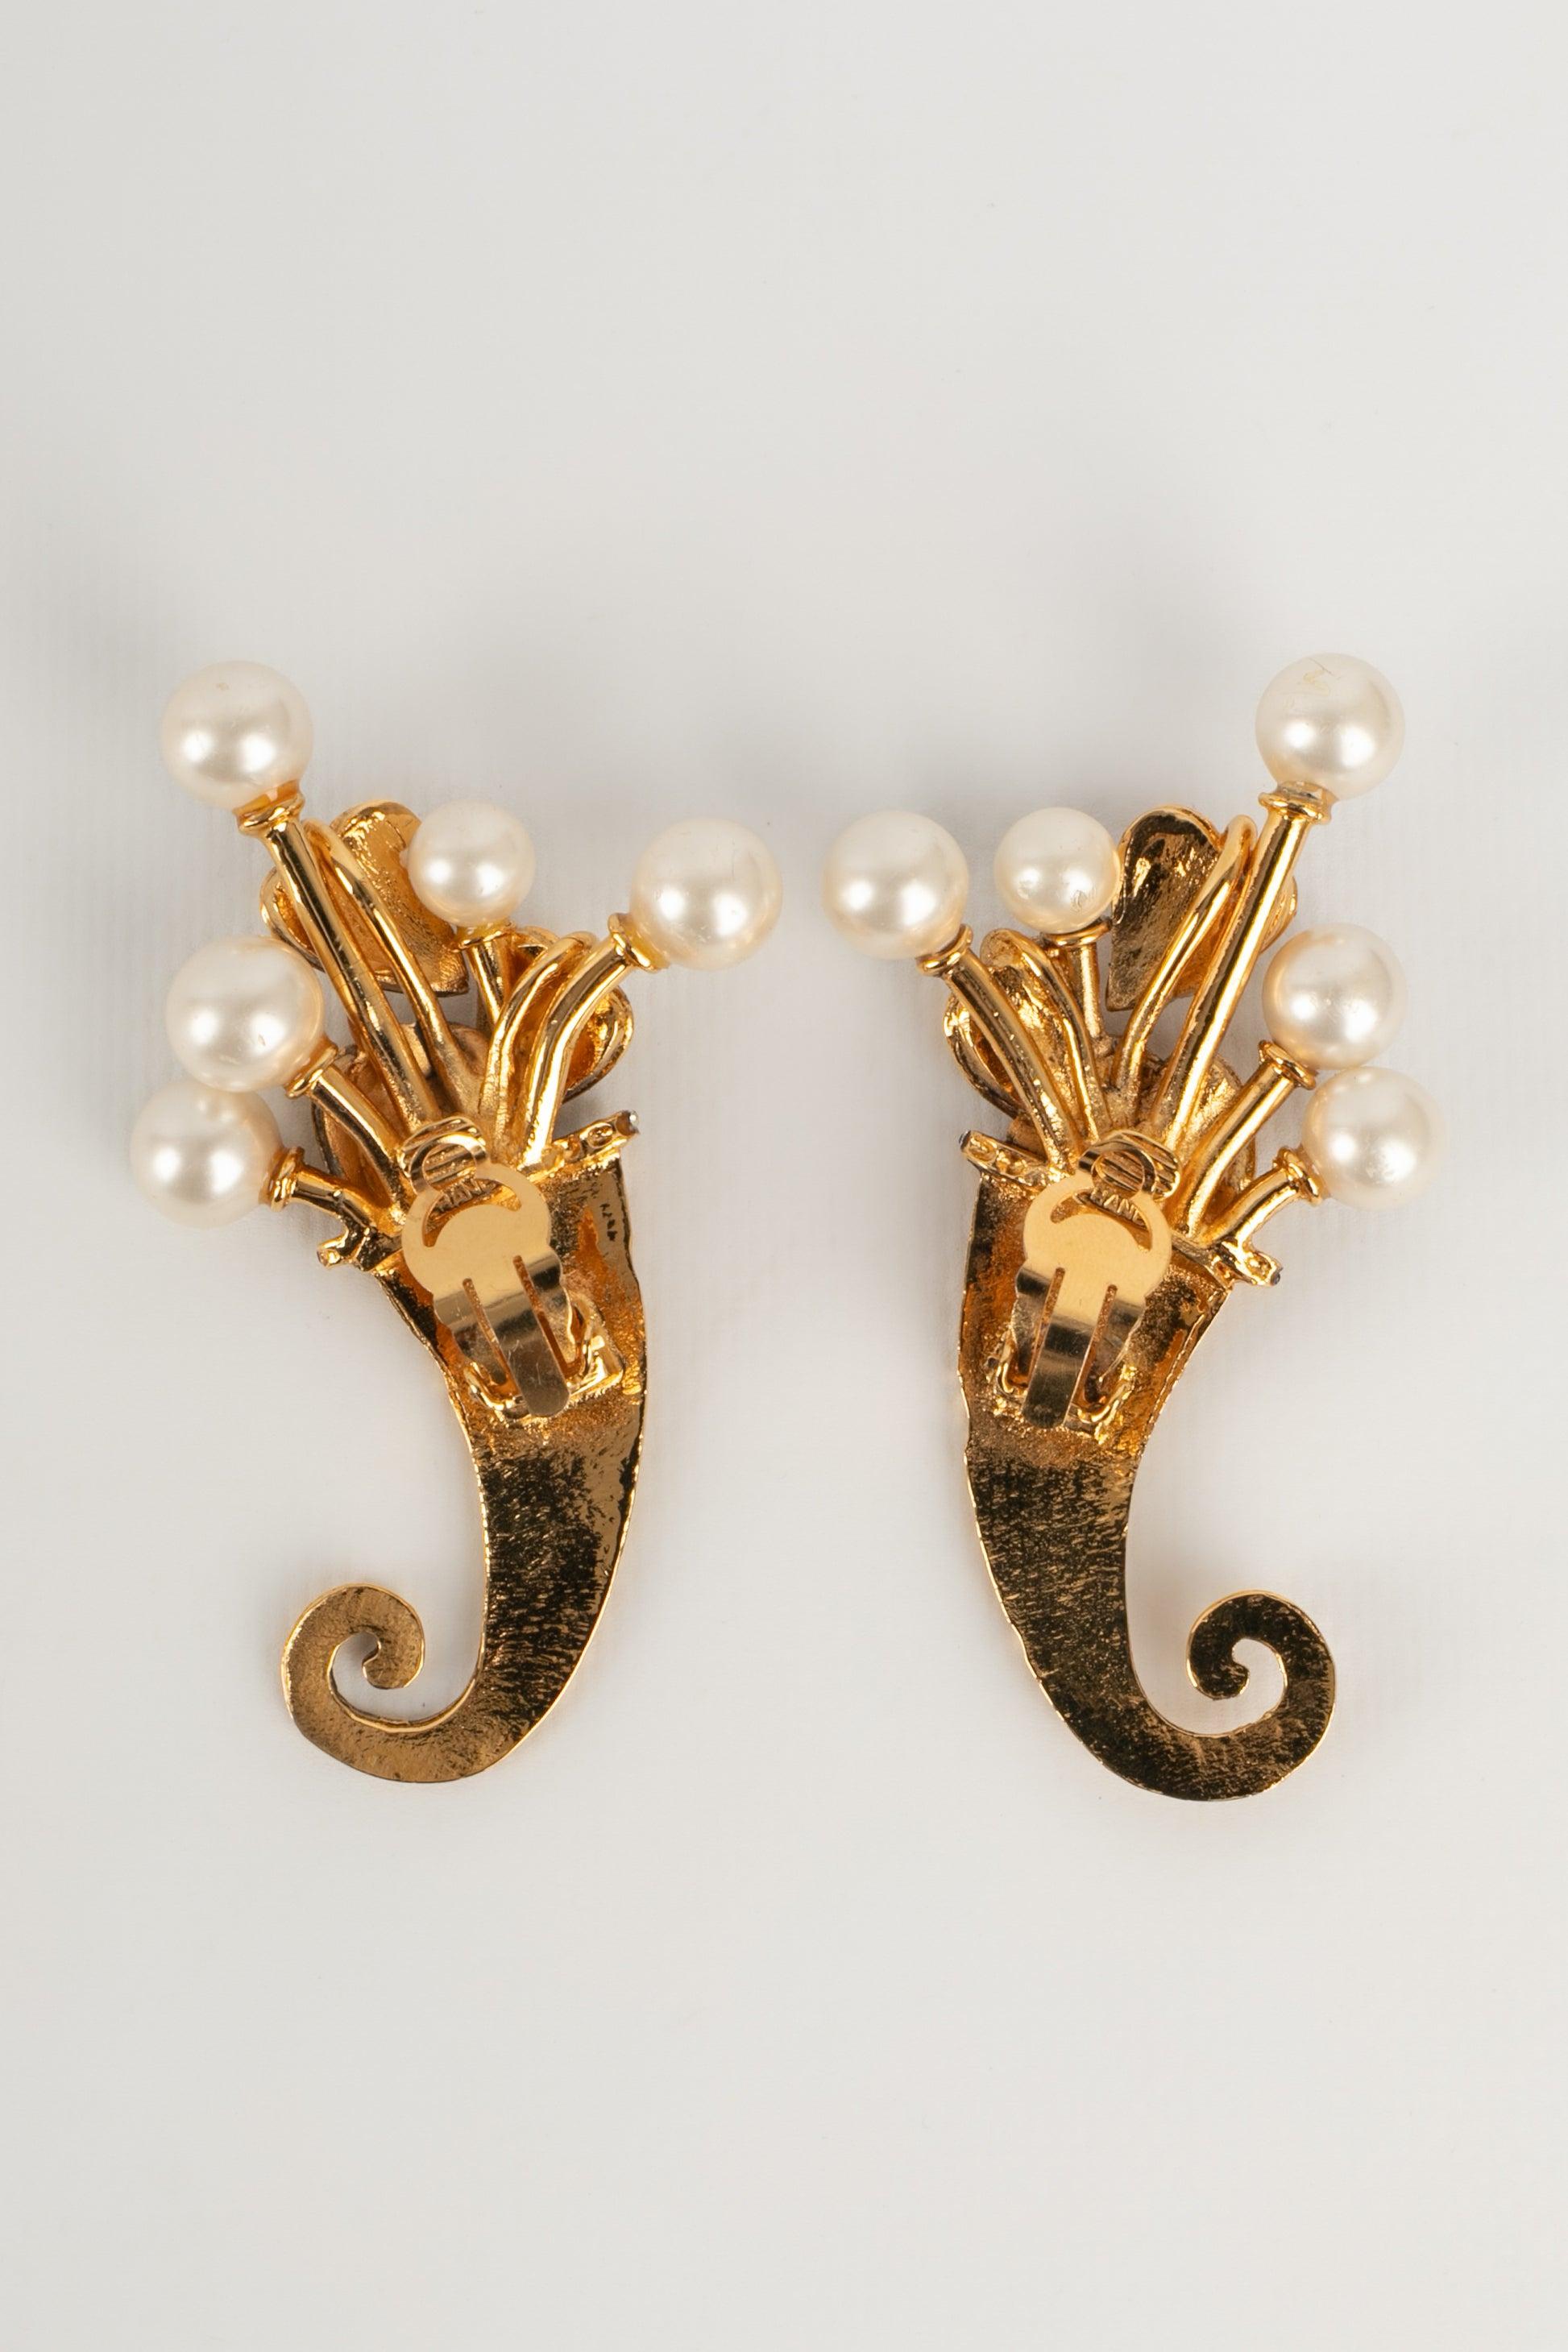 Chanel - Golden metal earrings with costume pearls and rhinestones.

Additional information:
Condition: Very good condition
Dimensions: Height: 7.5 cm

Seller reference: BOB147